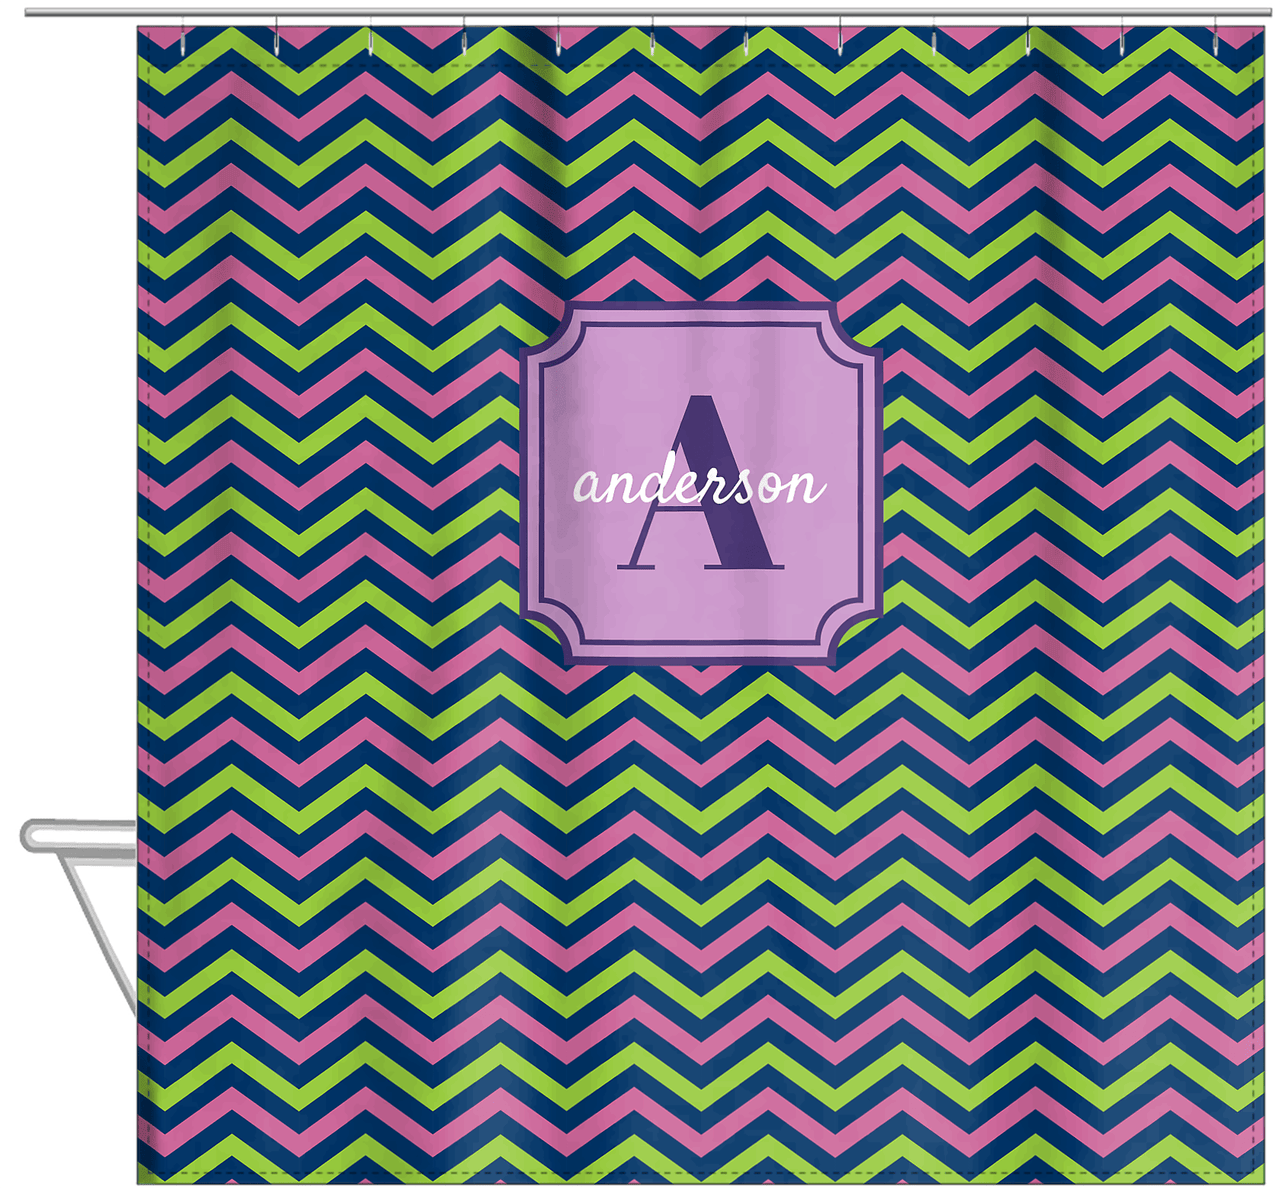 Personalized Chevron Shower Curtain - Purple and Lime - Stamp Nameplate - Hanging View